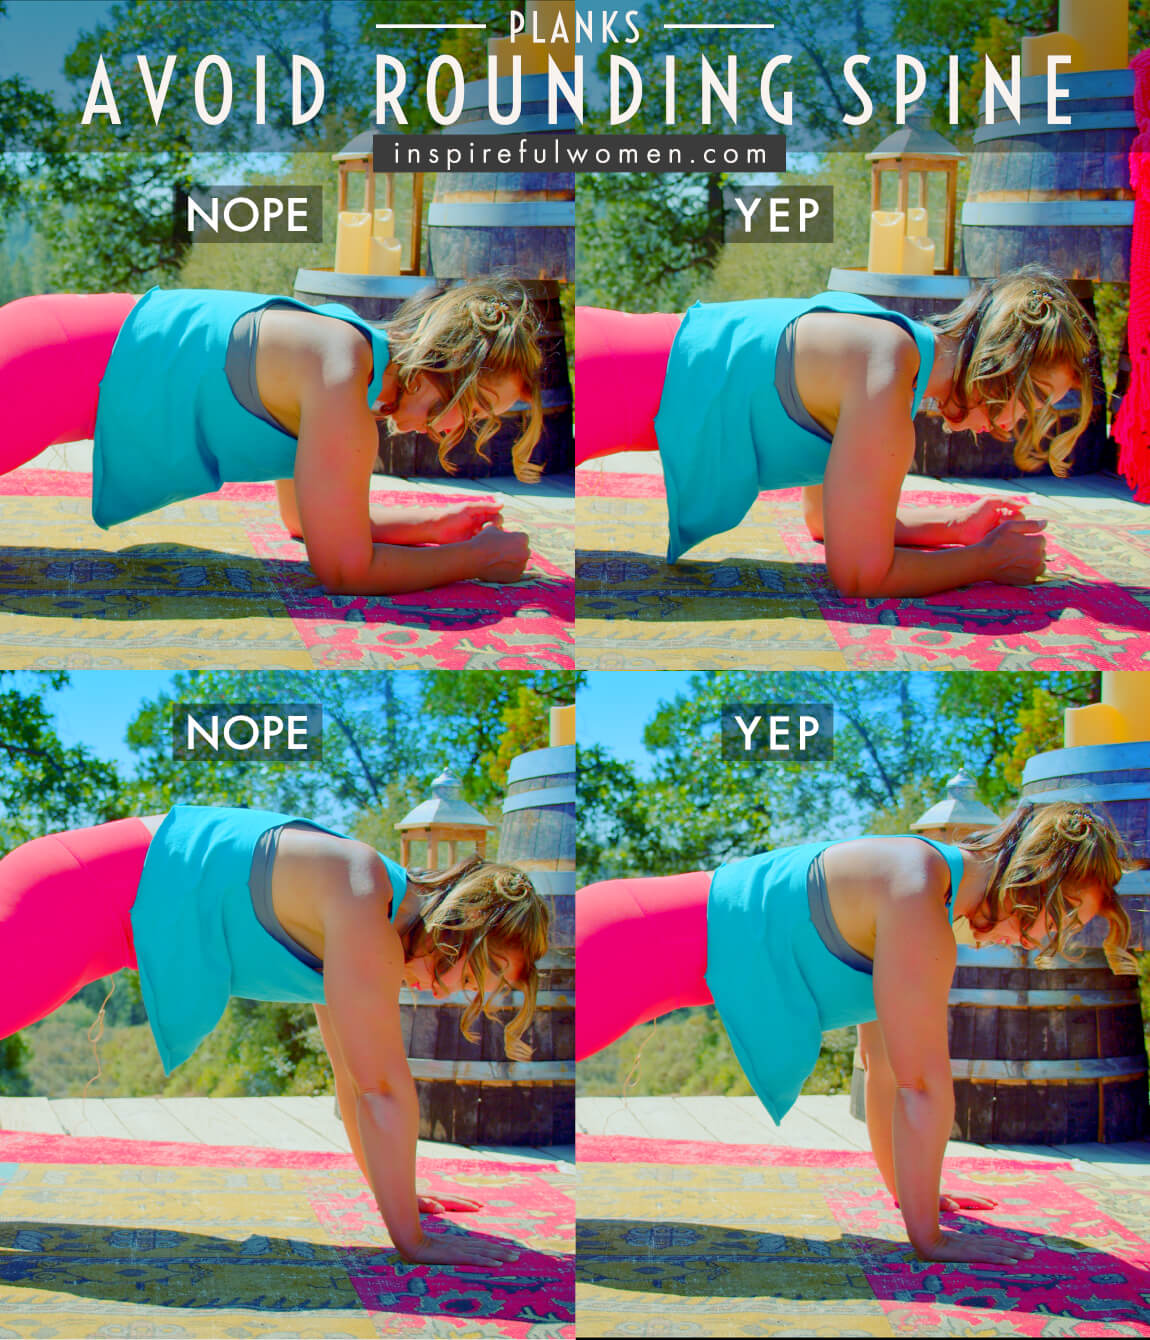 avoid-rounding-spine-plank-core-exercise-common-mistakes